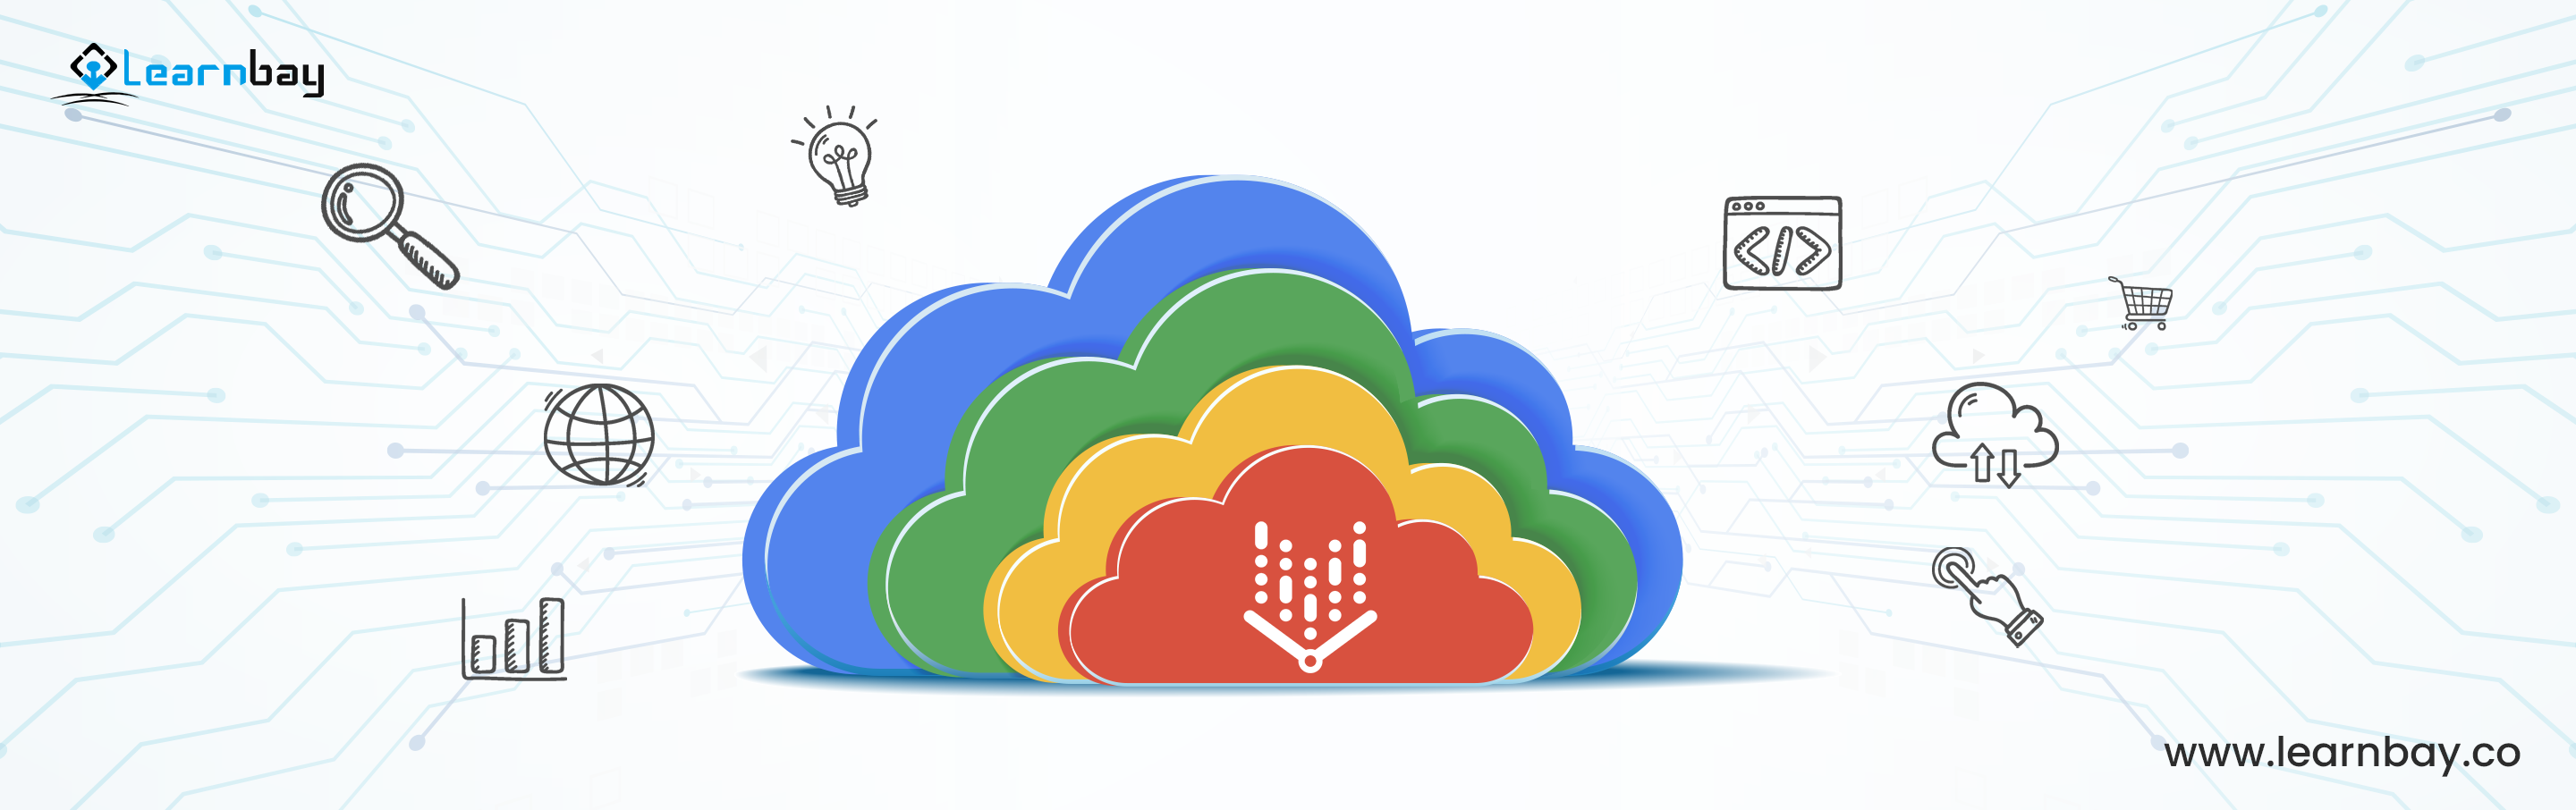 Four  overlapped logos of Cloud ML surrounded by various symbols like bar graphs, coding console, browser, etc  indicates the multi dimensional applications of Cloud ML.